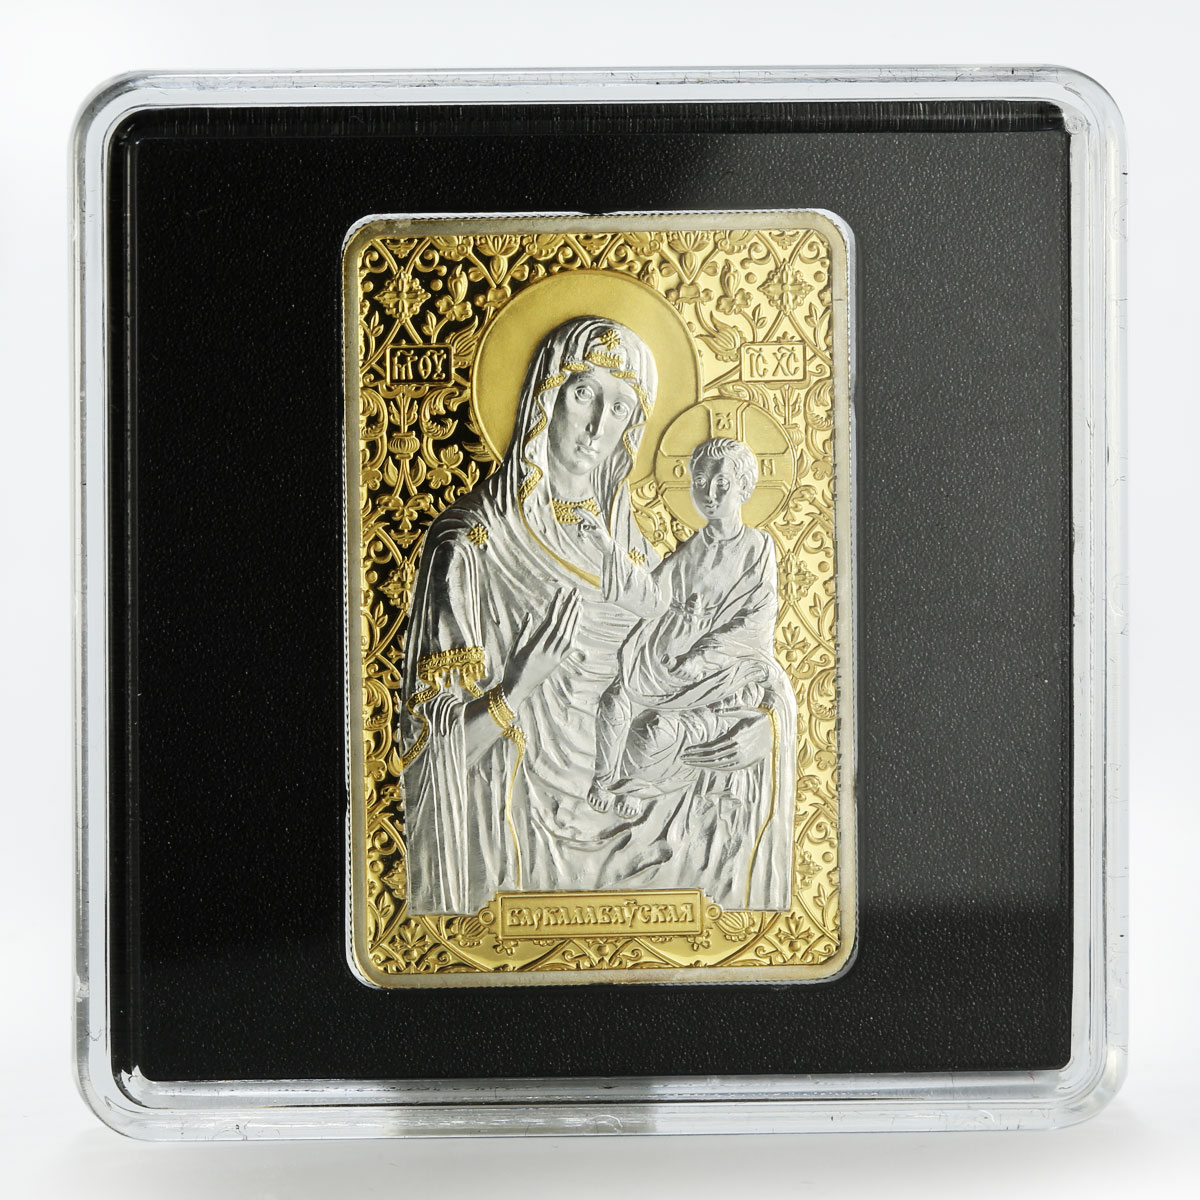 Belarus 20 rubles Icon of Most Holy Theotokos gilded silver coin 2012